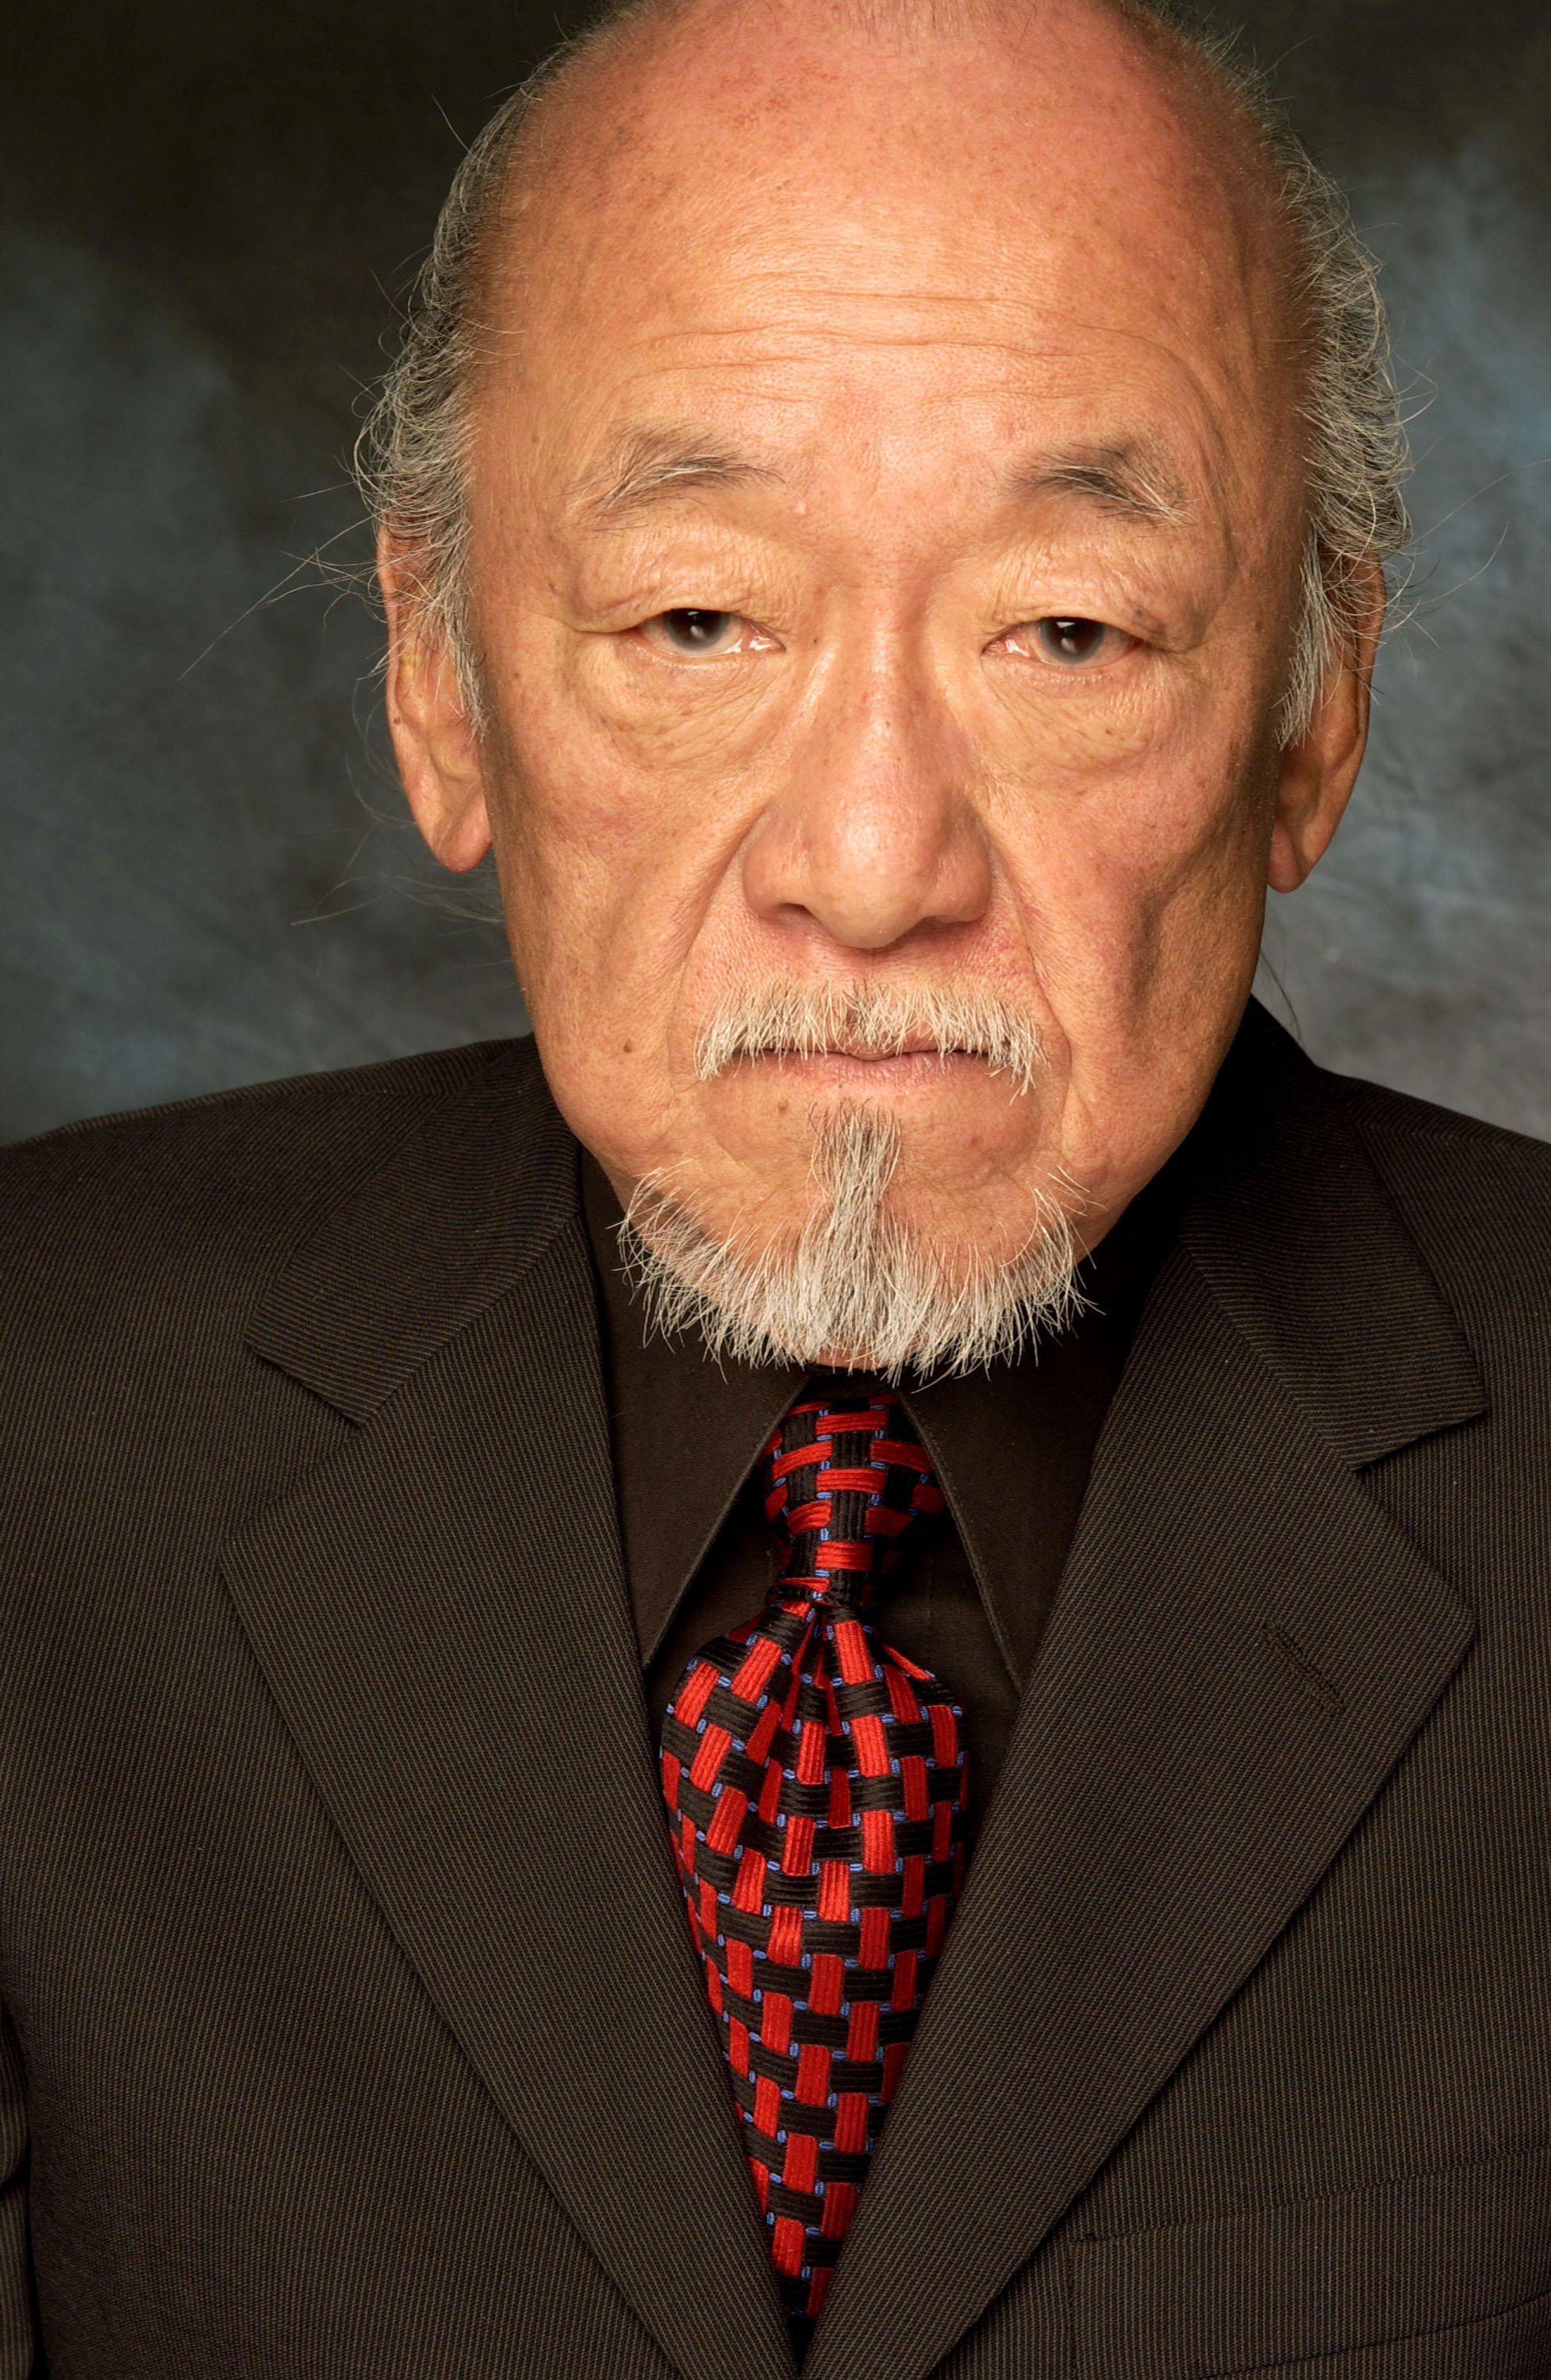 Pat Morita during CineVegas Film Festival 2003 posing for "Stuey" portraits at Palms Hotel in Las Vegas, Nevada. / Source: Getty Images